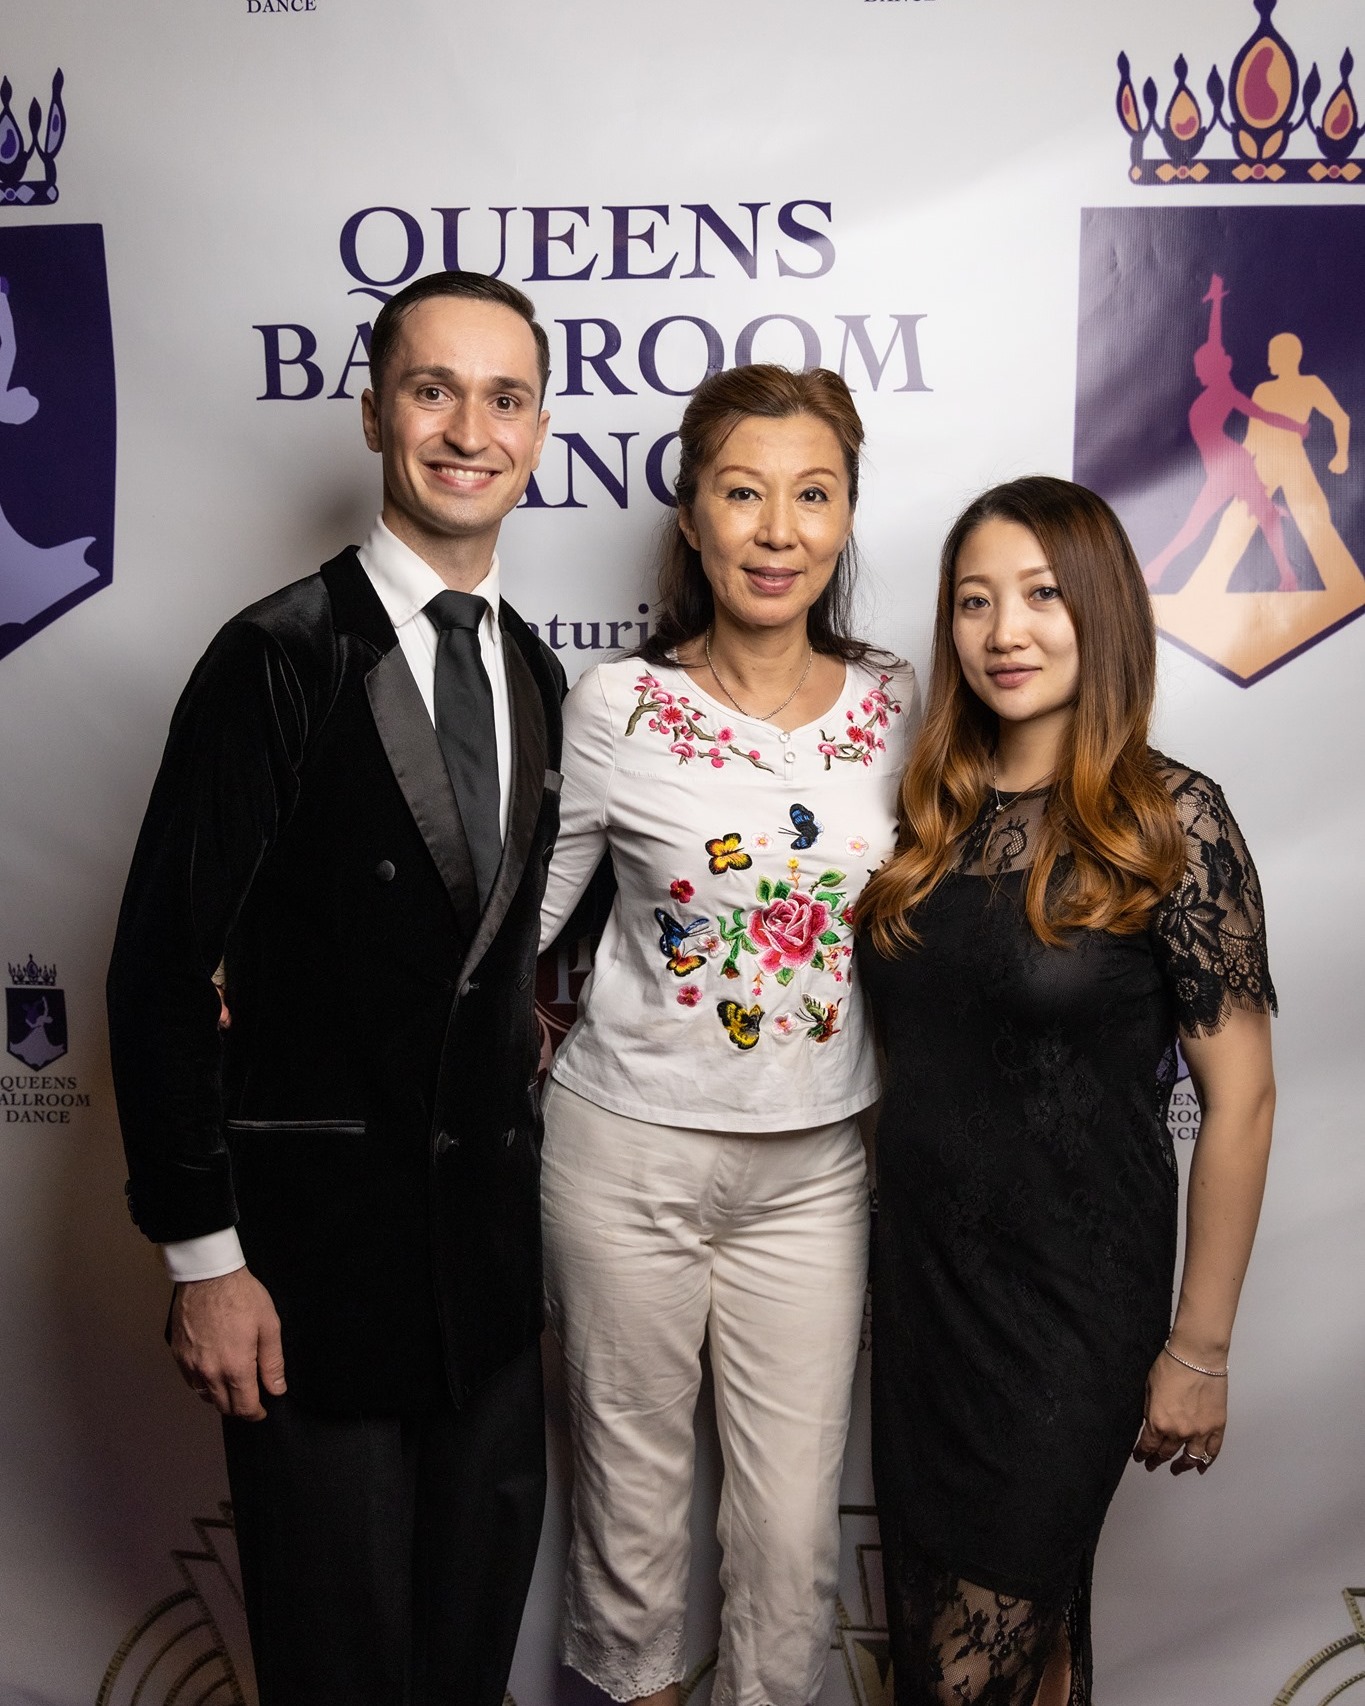 ABOUT US: The owners of Queens Ballroom Dance